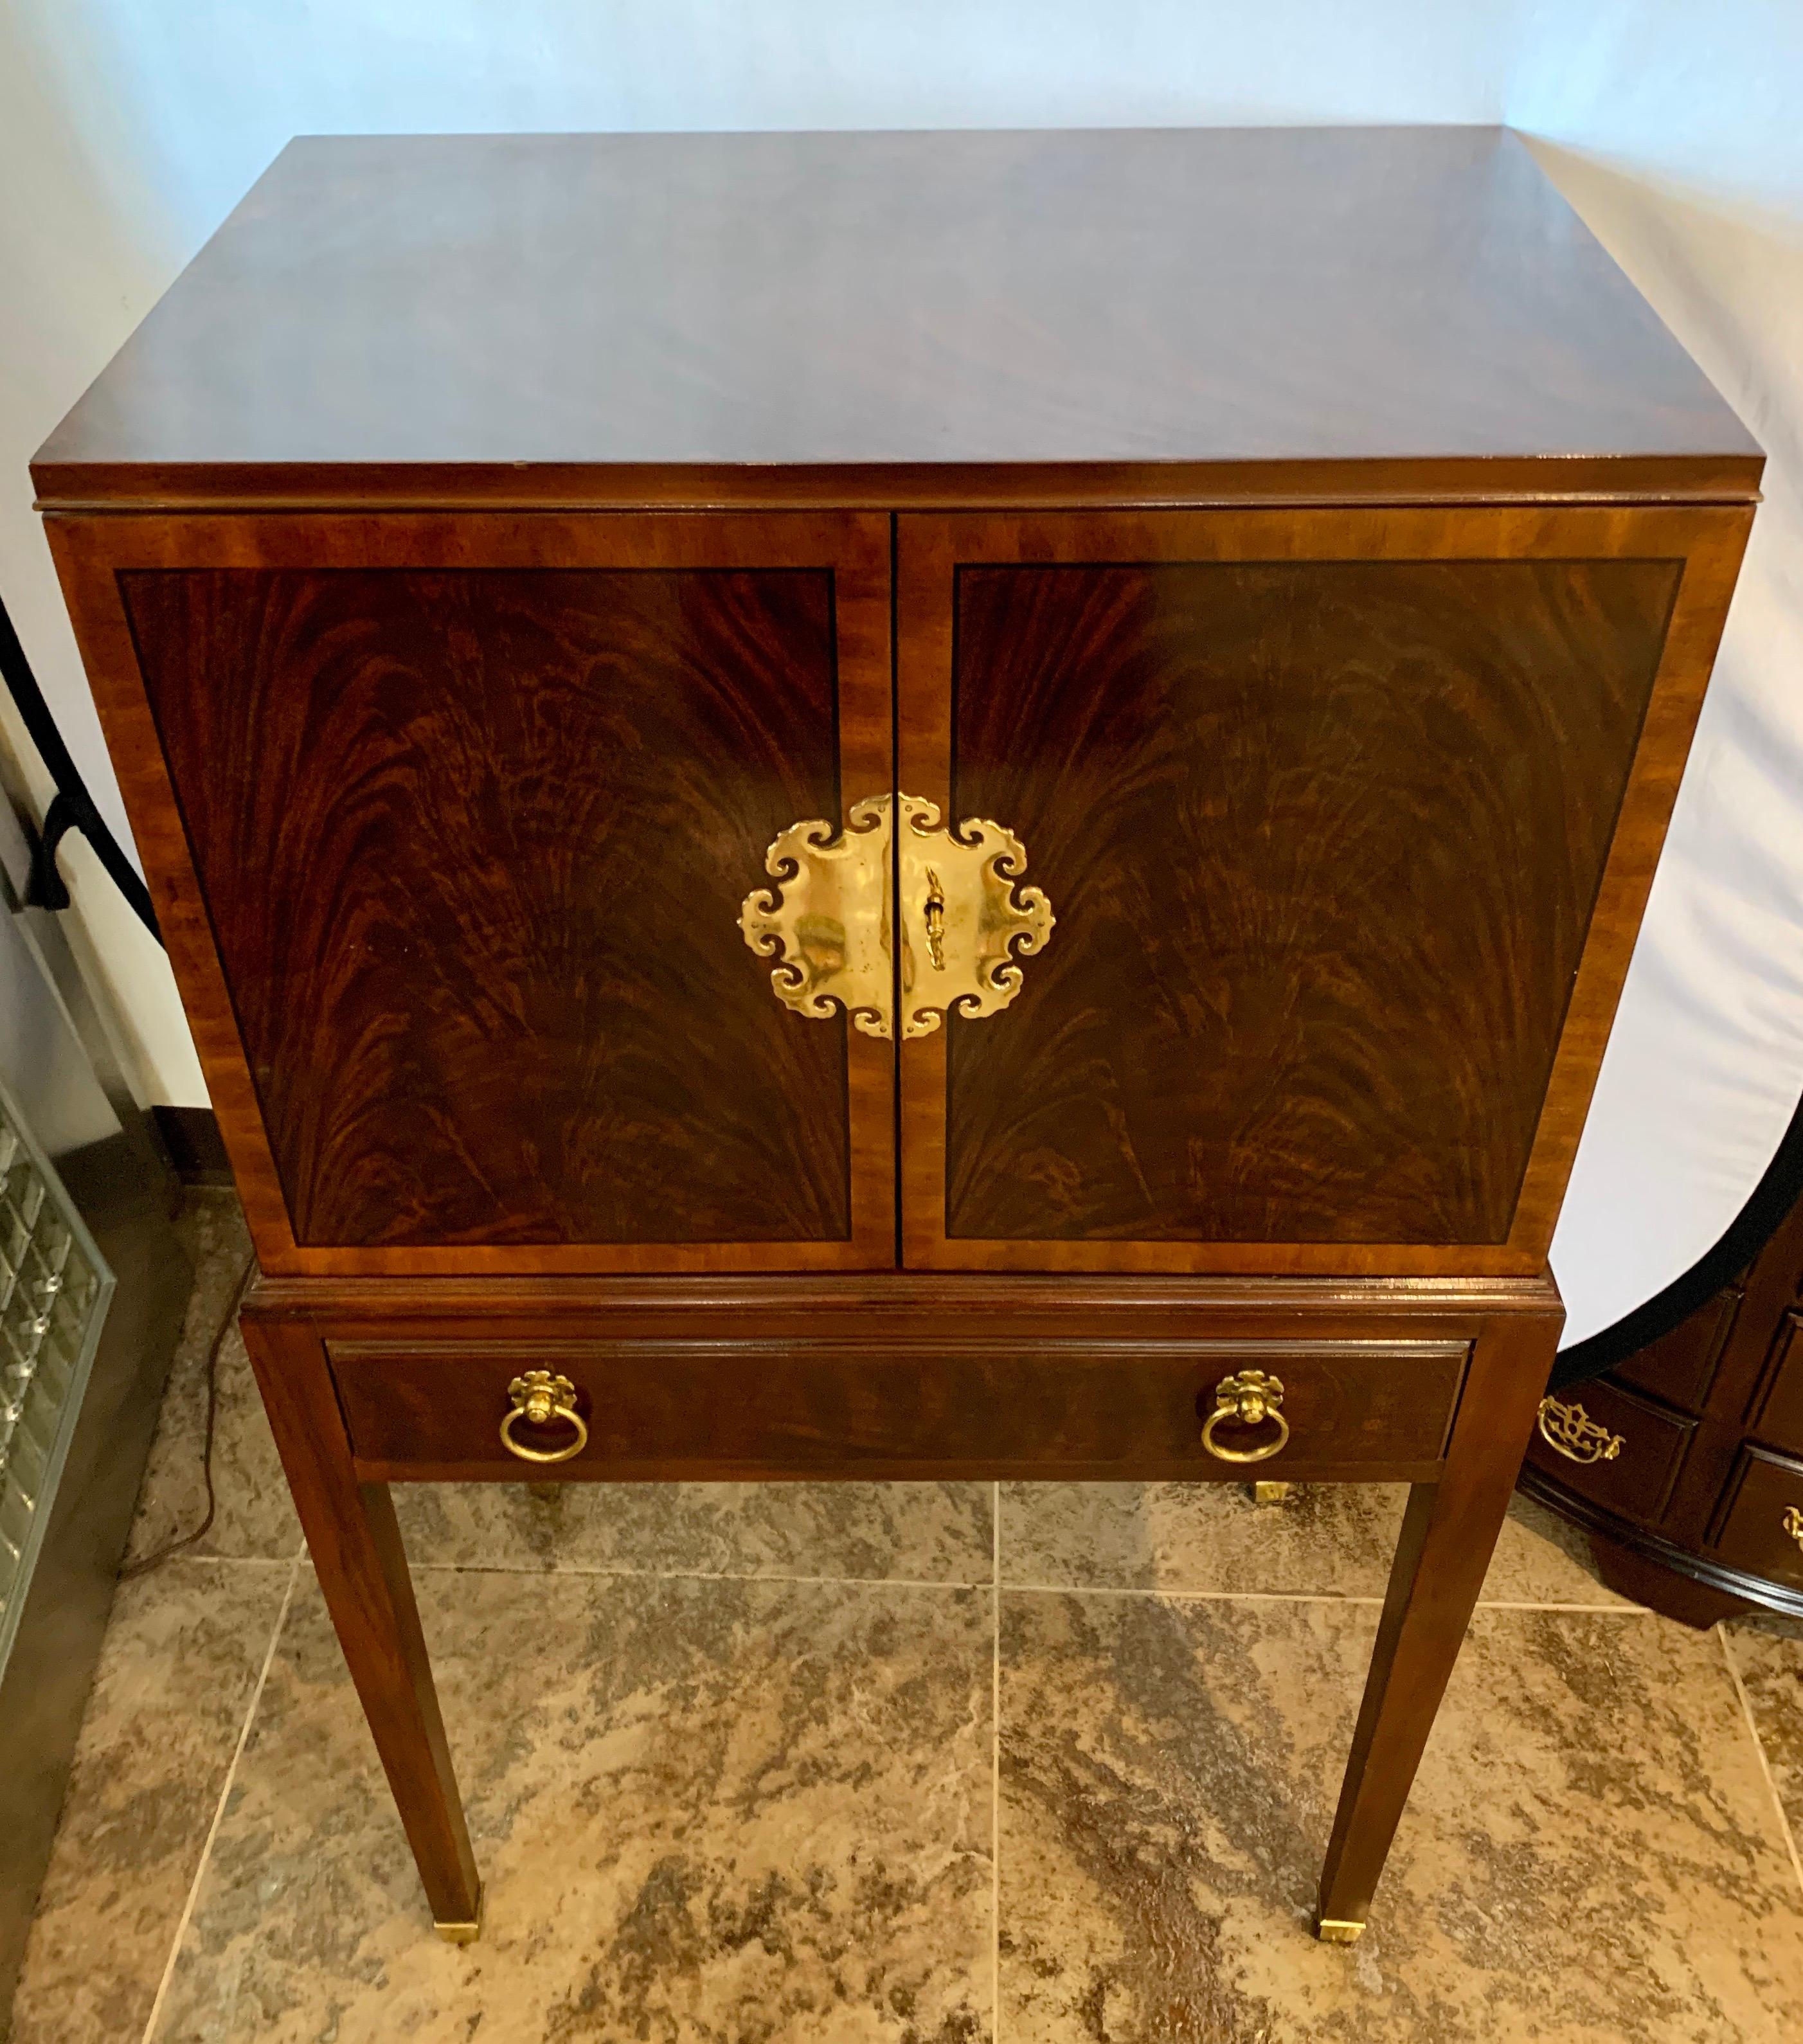 Gorgeous vintage Drexel furniture mahogany inlay silverware chest on stand. The top portion has two front doors that open to four felt lines drawers. The bottom portion has one-drawer. All original brass round drawer pulls. Doors have ornate